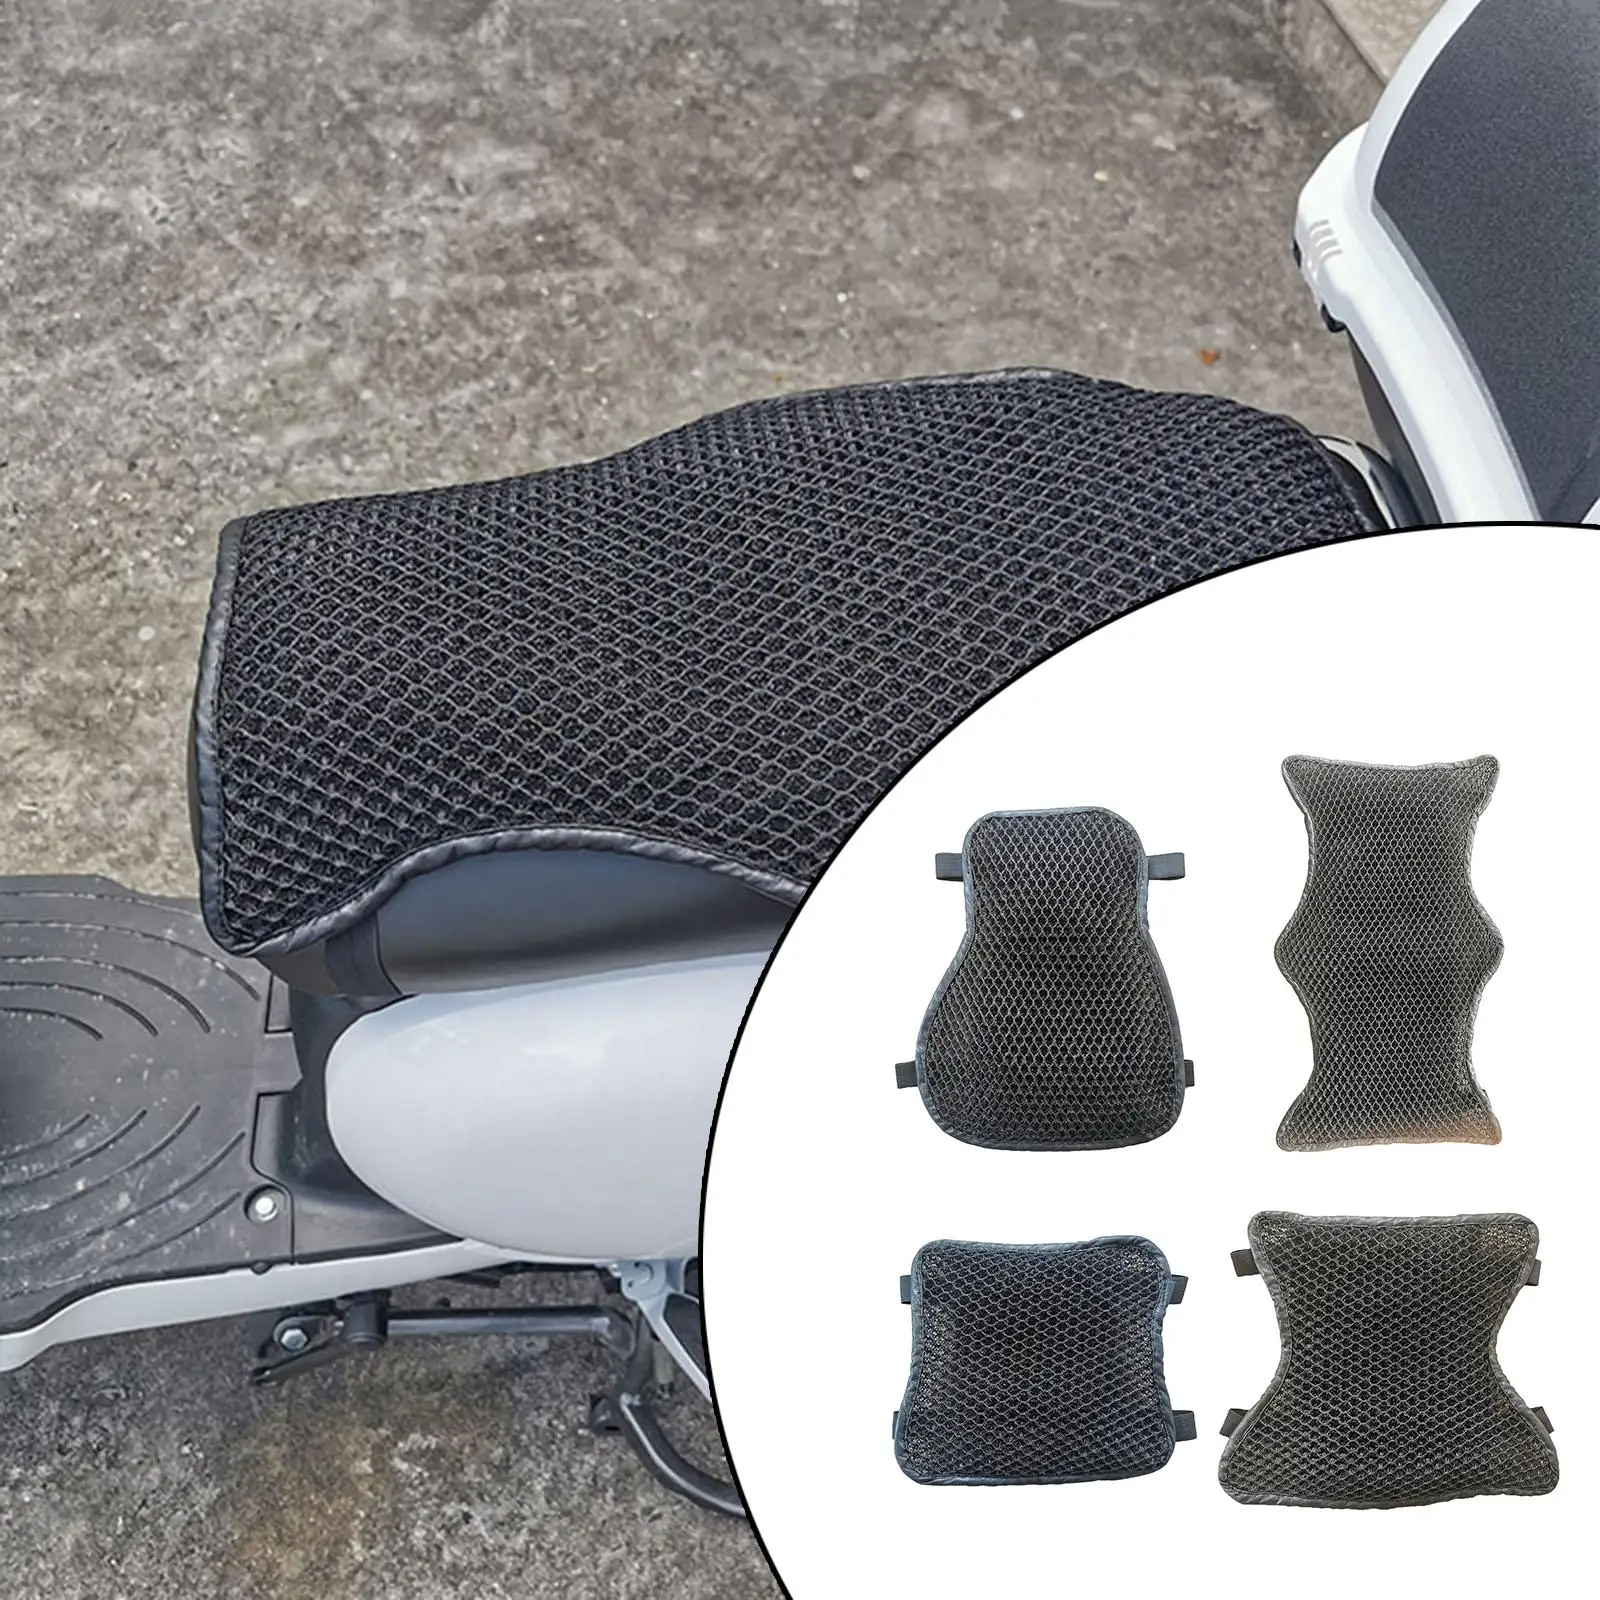 Motorcycle Seat Cushion Reduces Pressure Anti-Slip Fits for Long Rides Sport